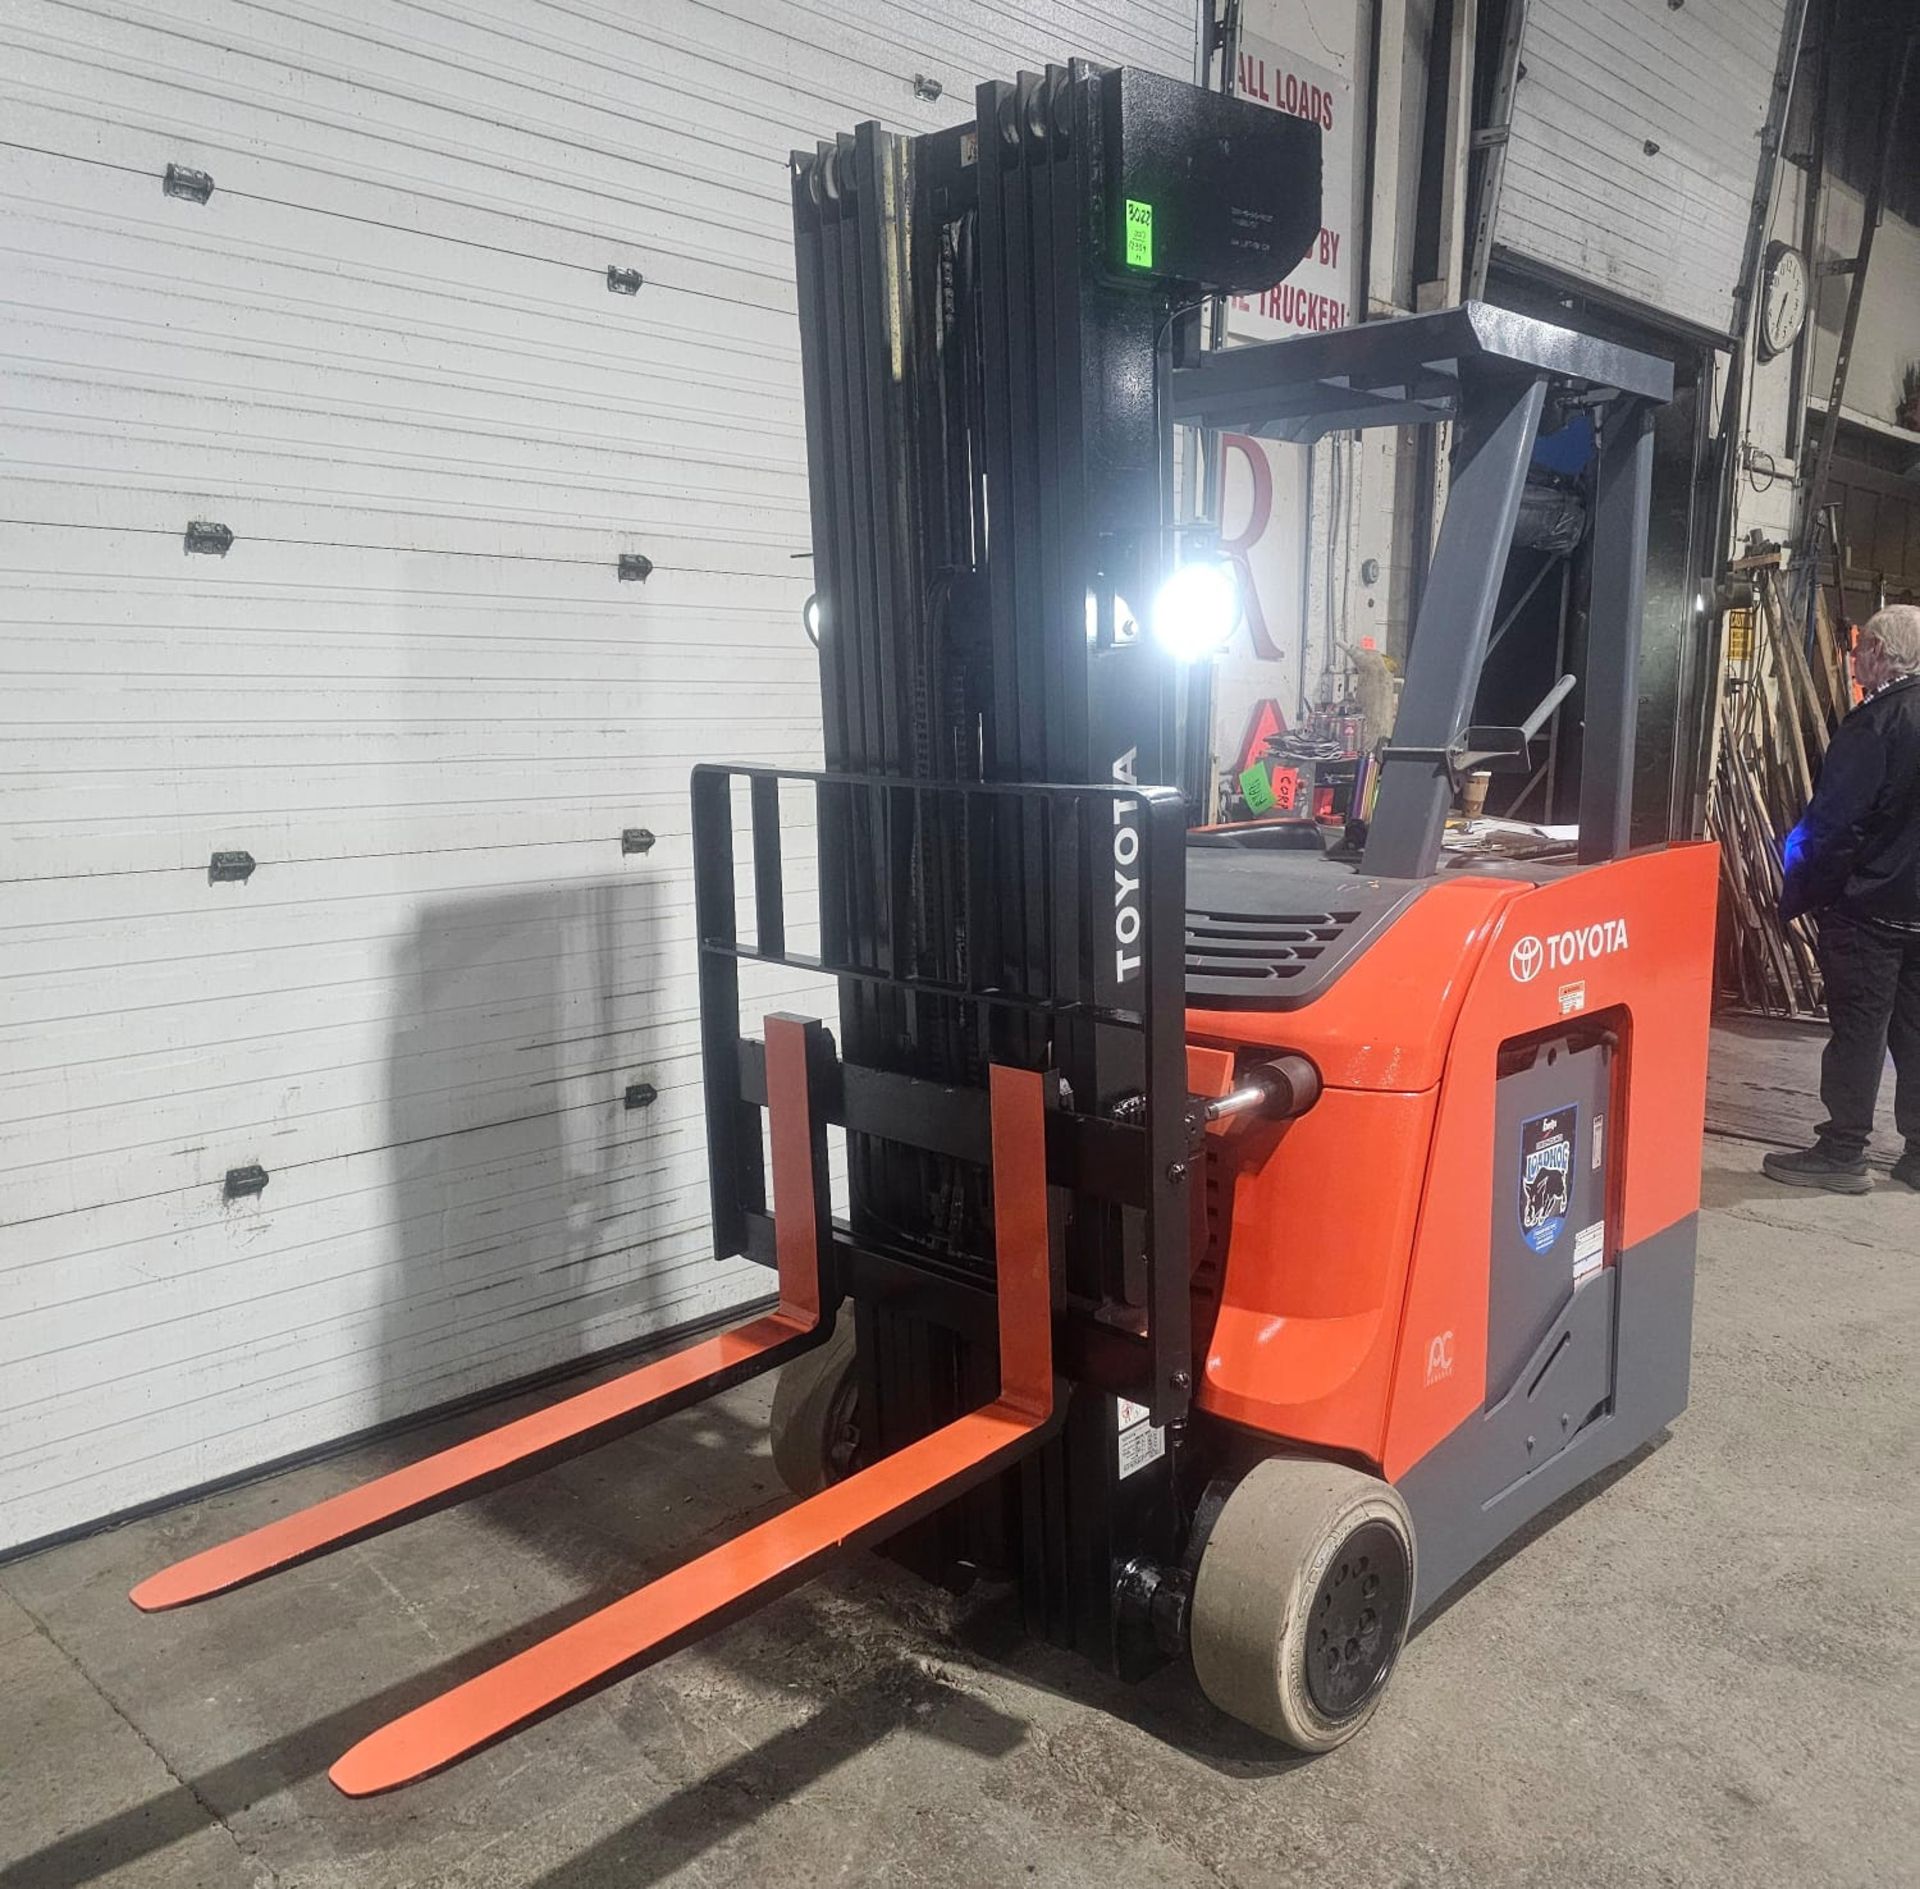 2017 Toyota 4,000lbs Capacity Forklift Electric 36V with sideshift & 4-STAGE MAST 276" max load - Image 7 of 9